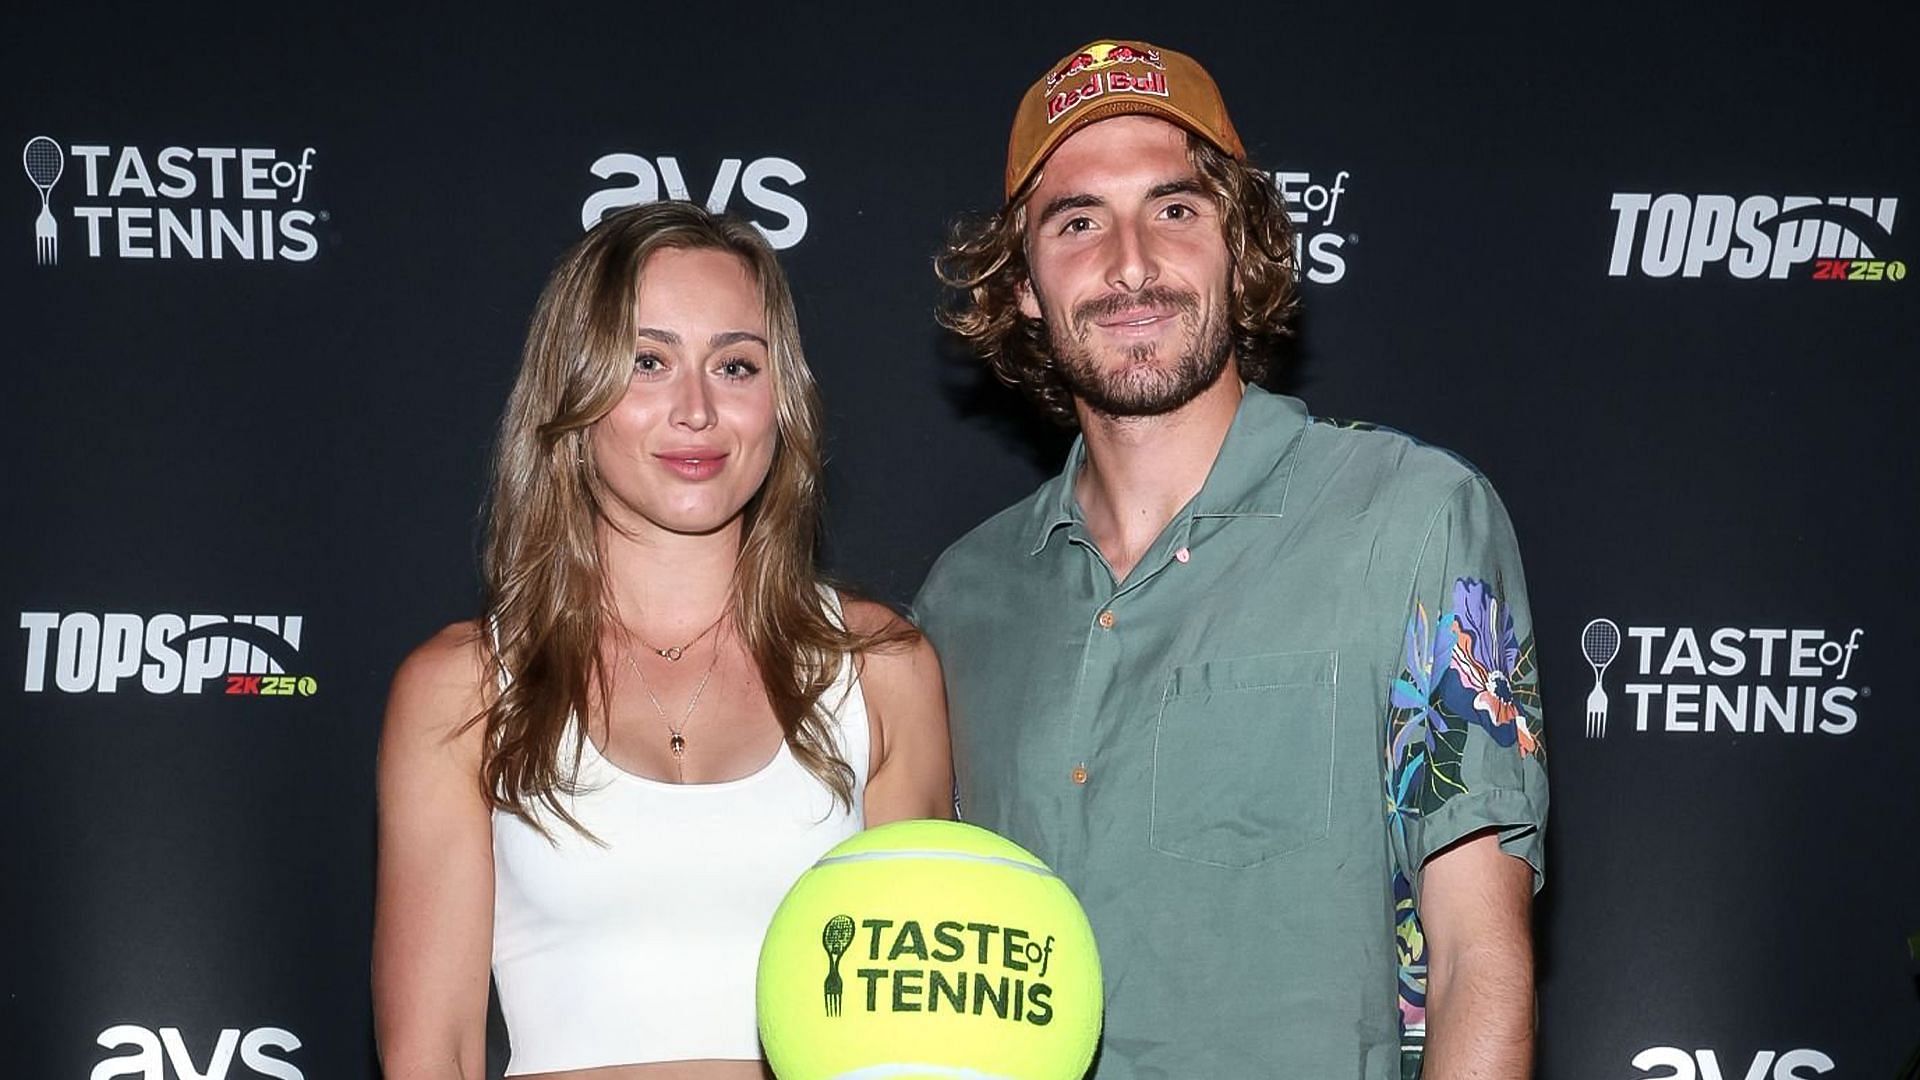 Stefanos Tsitsipas has revealed his favorite picture with girlfriend Paula Badosa